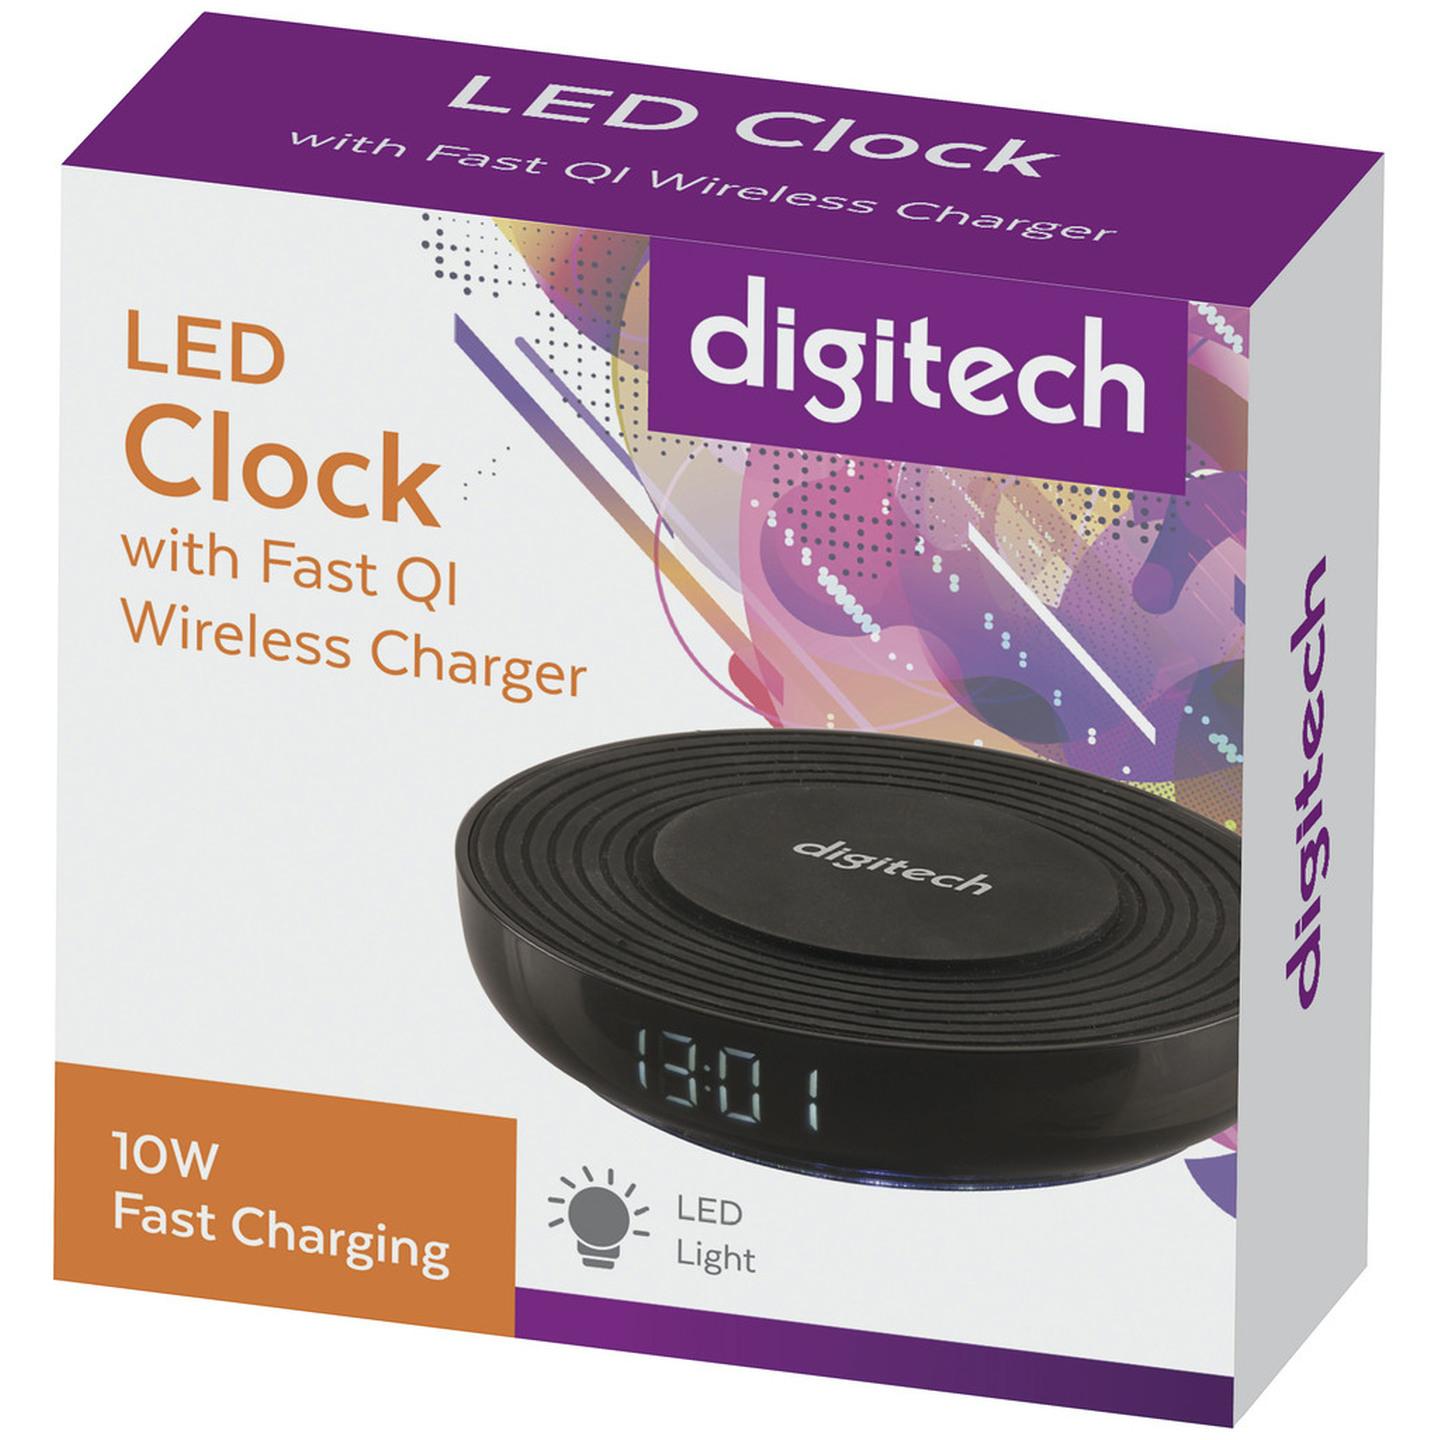 LED Clock with Light and Fast QI Wireless Charger